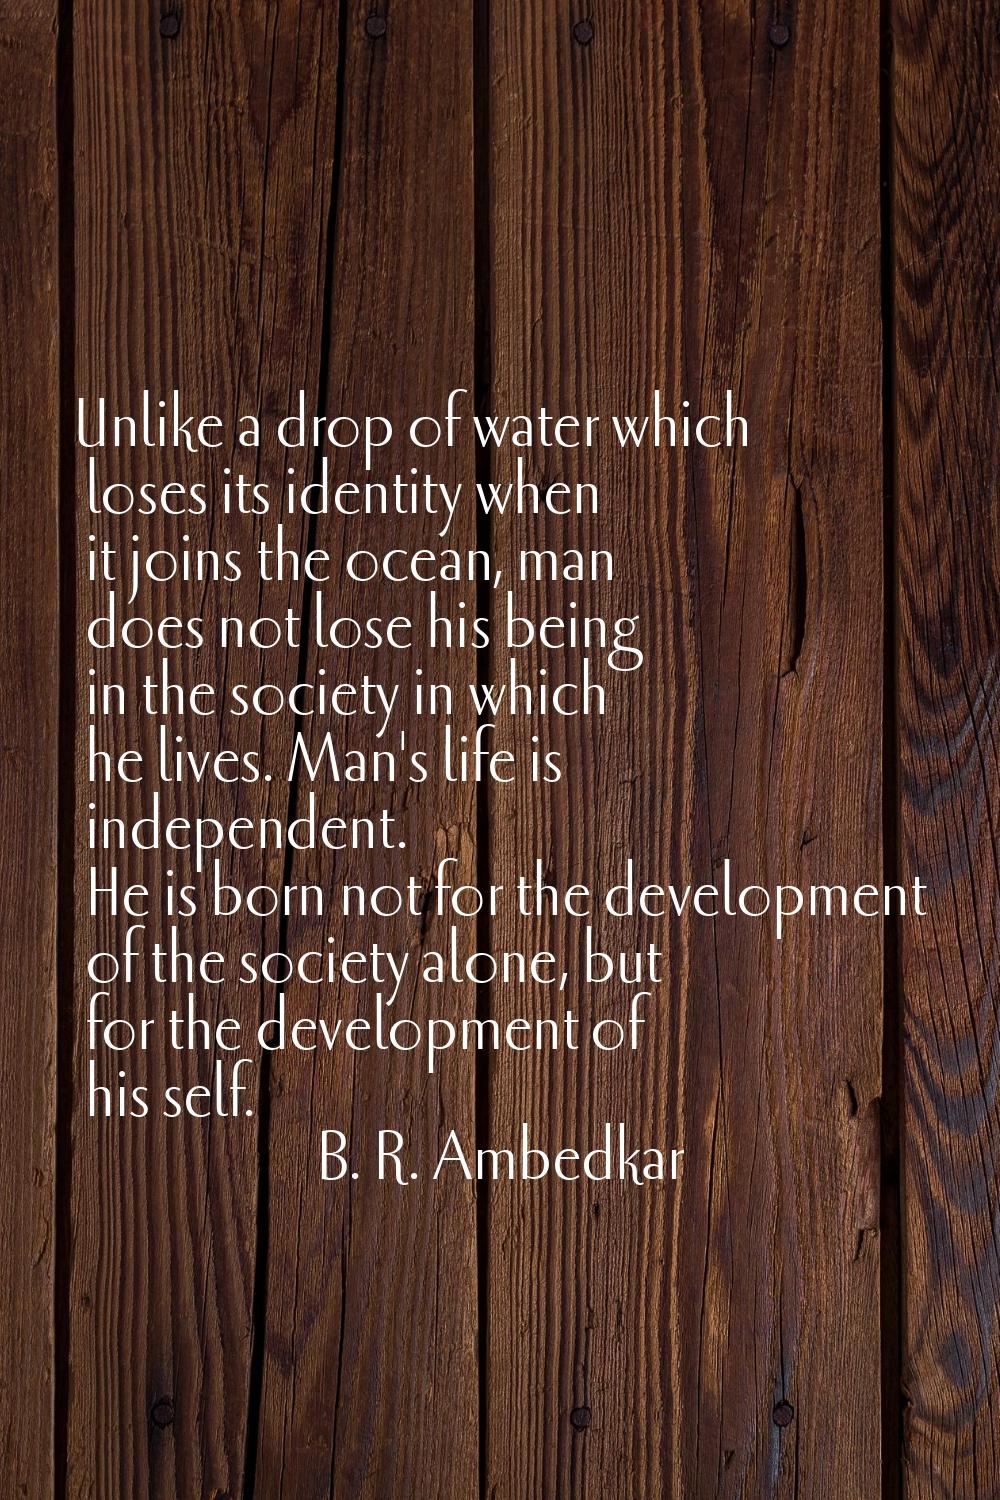 Unlike a drop of water which loses its identity when it joins the ocean, man does not lose his bein